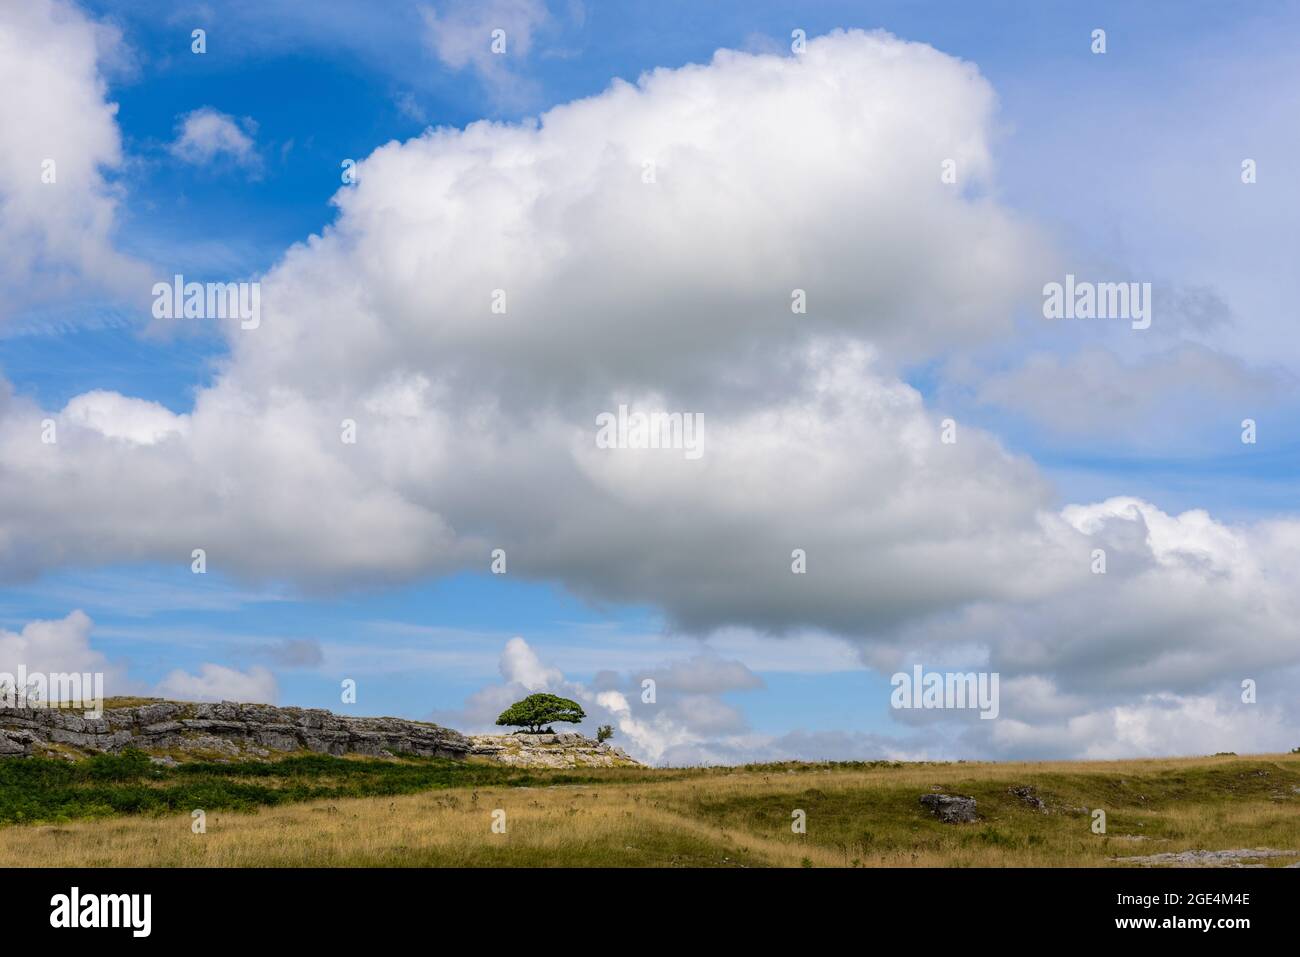 Burton In Kendal High Resolution Stock Photography and Images - Alamy